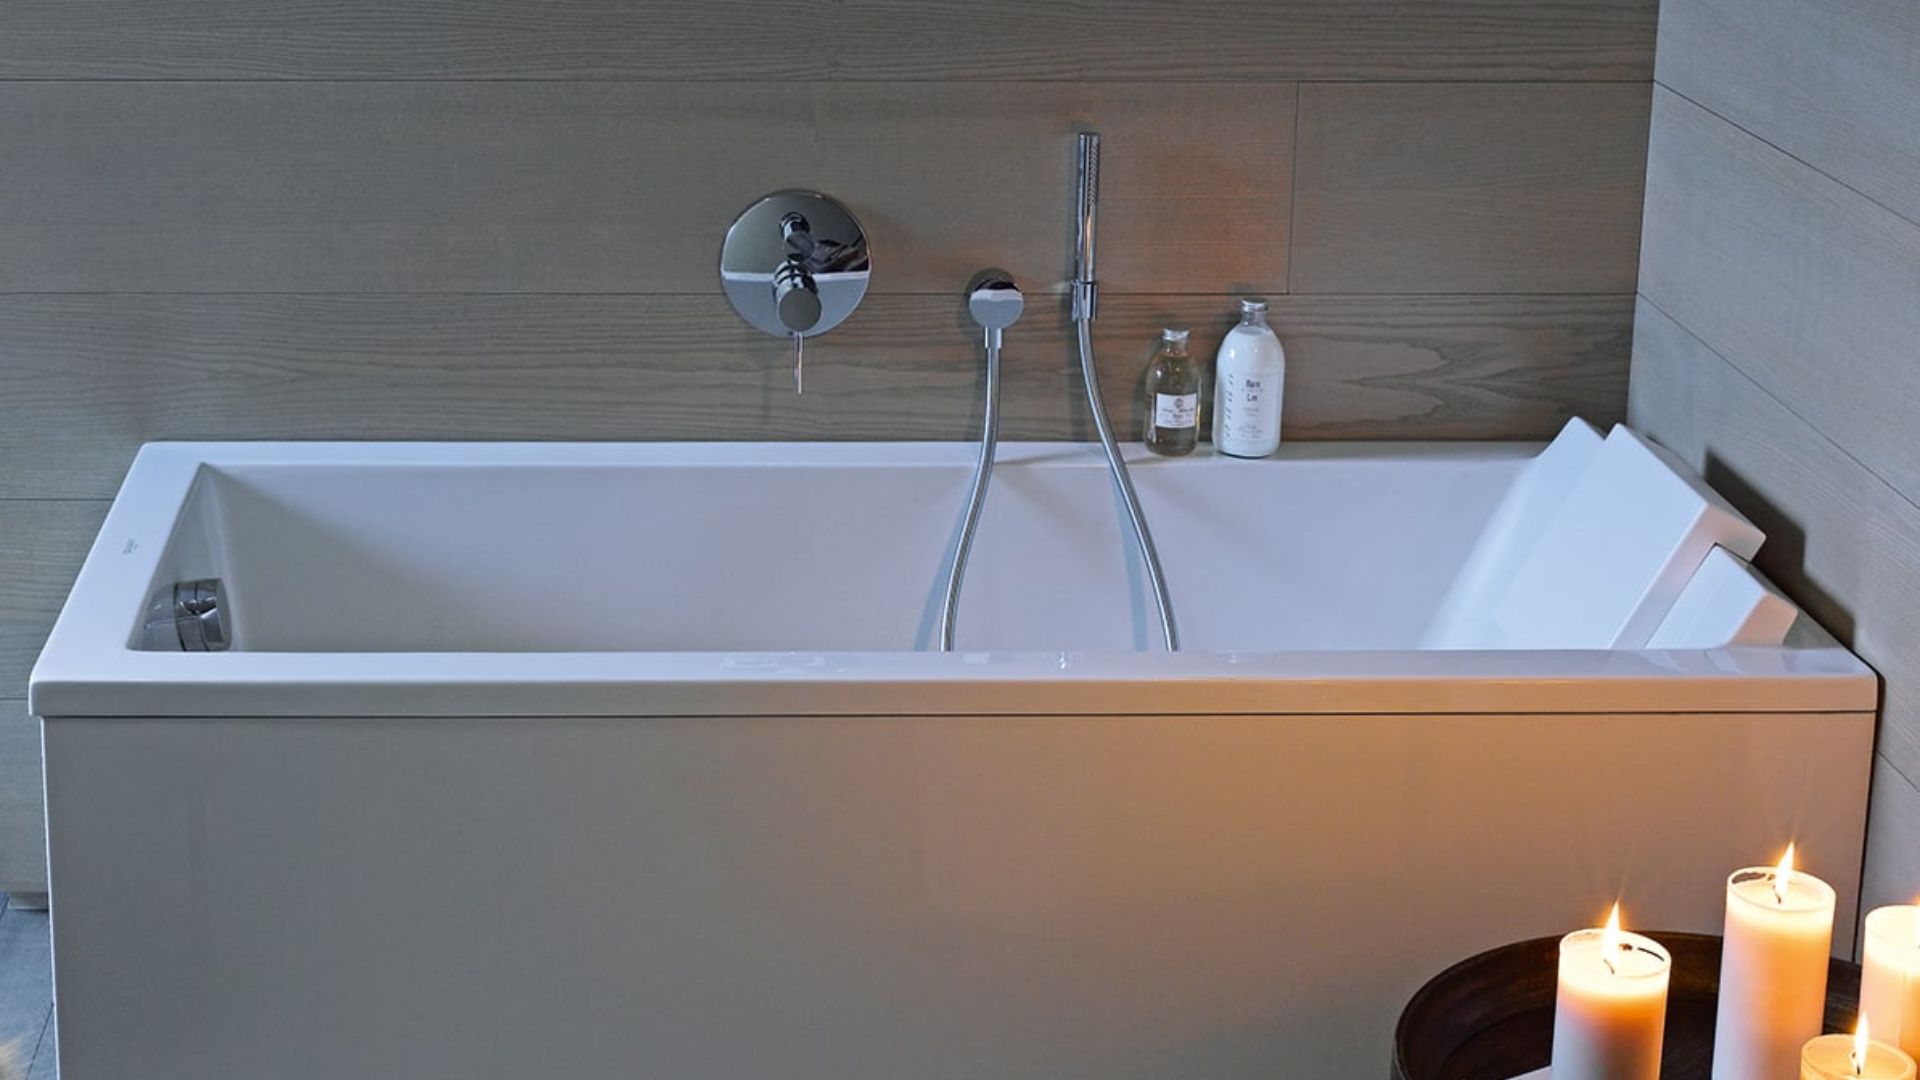 What Are the Advantages of a Rectangular Bathtub with Panel?